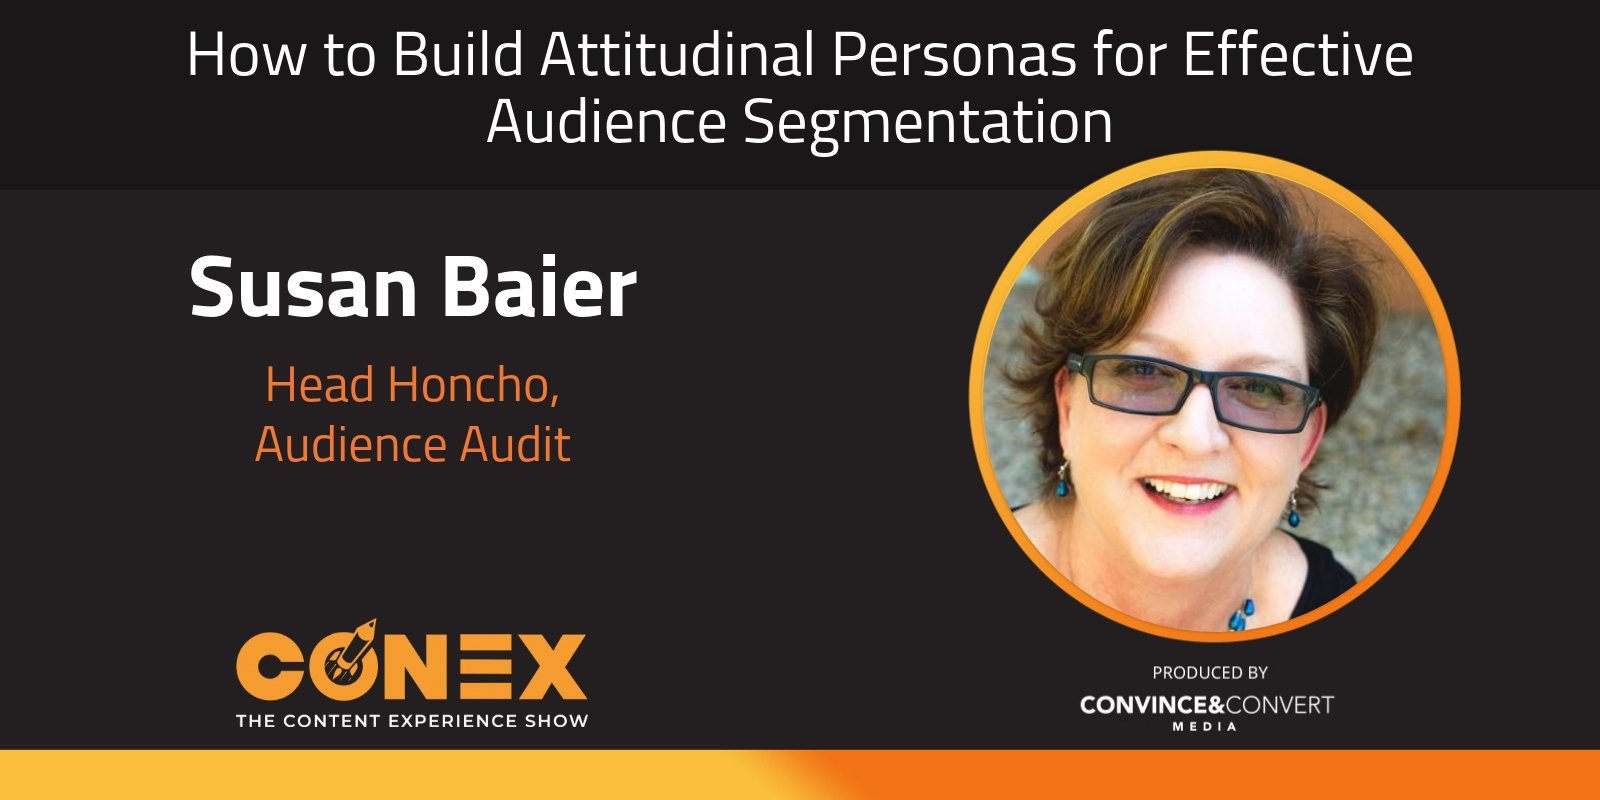 How to Build Attitudinal Personas for Effective Audience Segmentation